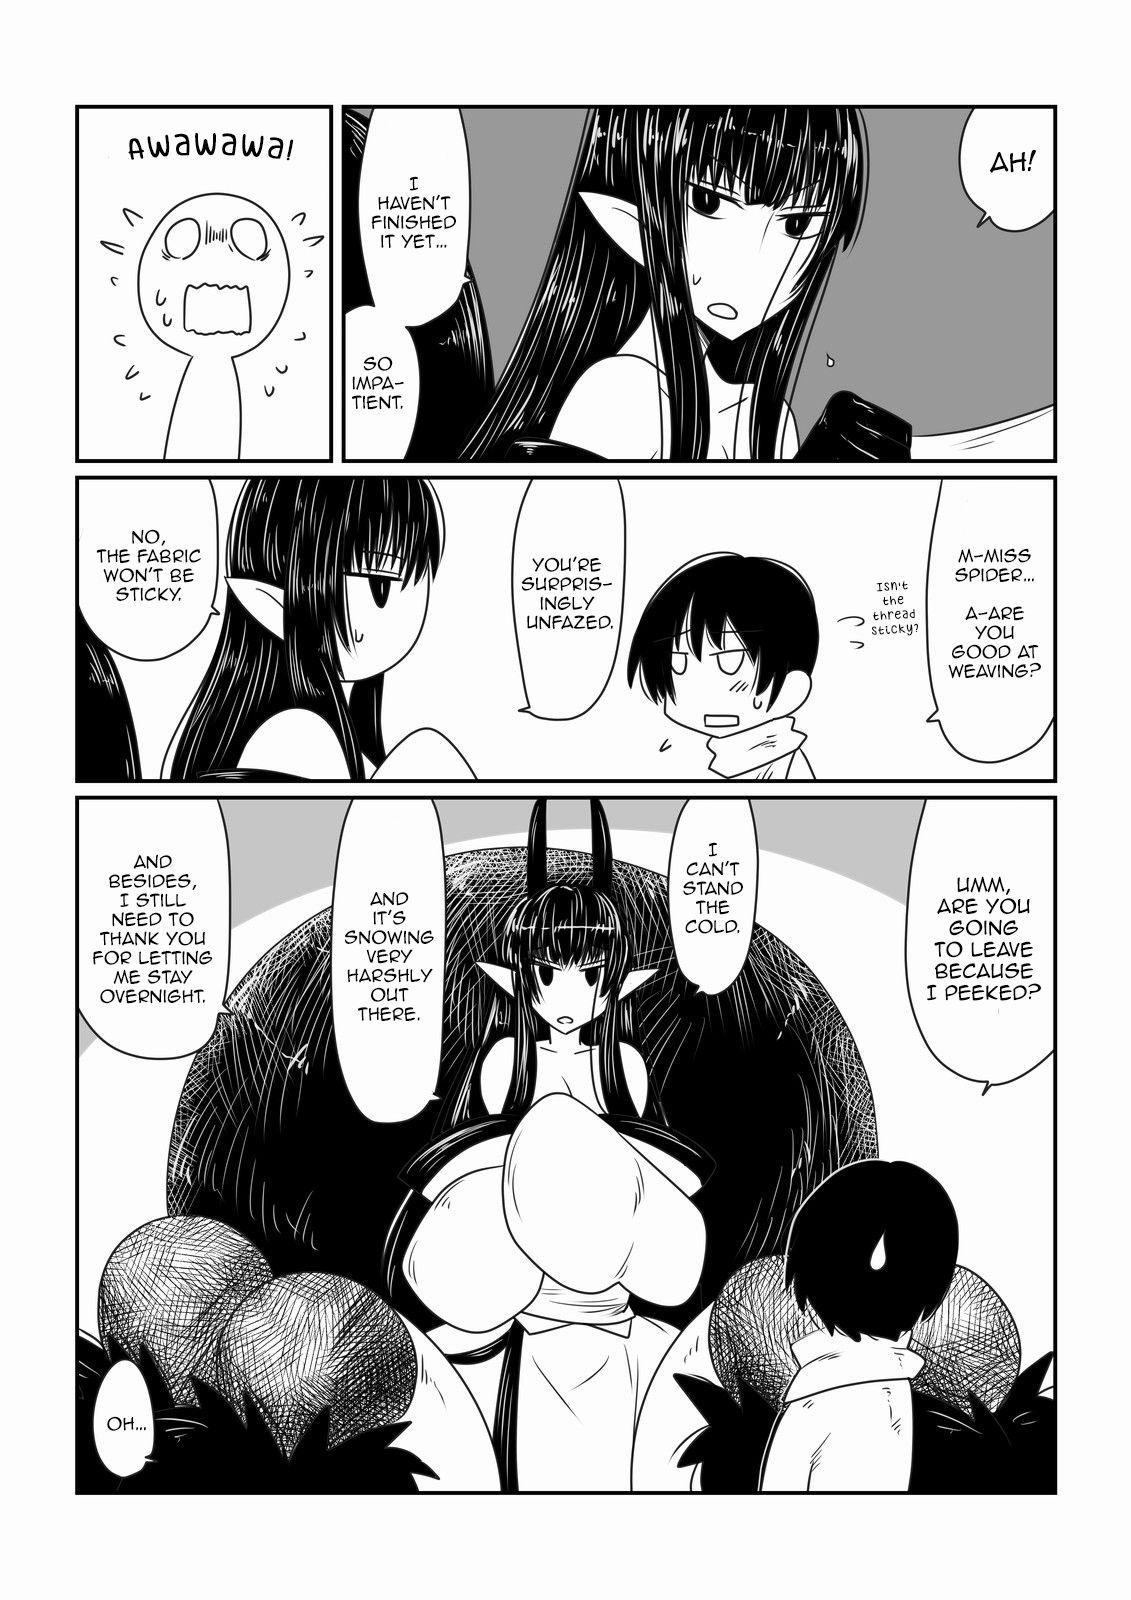 Lesbians Kumo Onna-san no Ongaeshi. | The Spider Woman's Repayment. - Original Doggy Style - Page 5